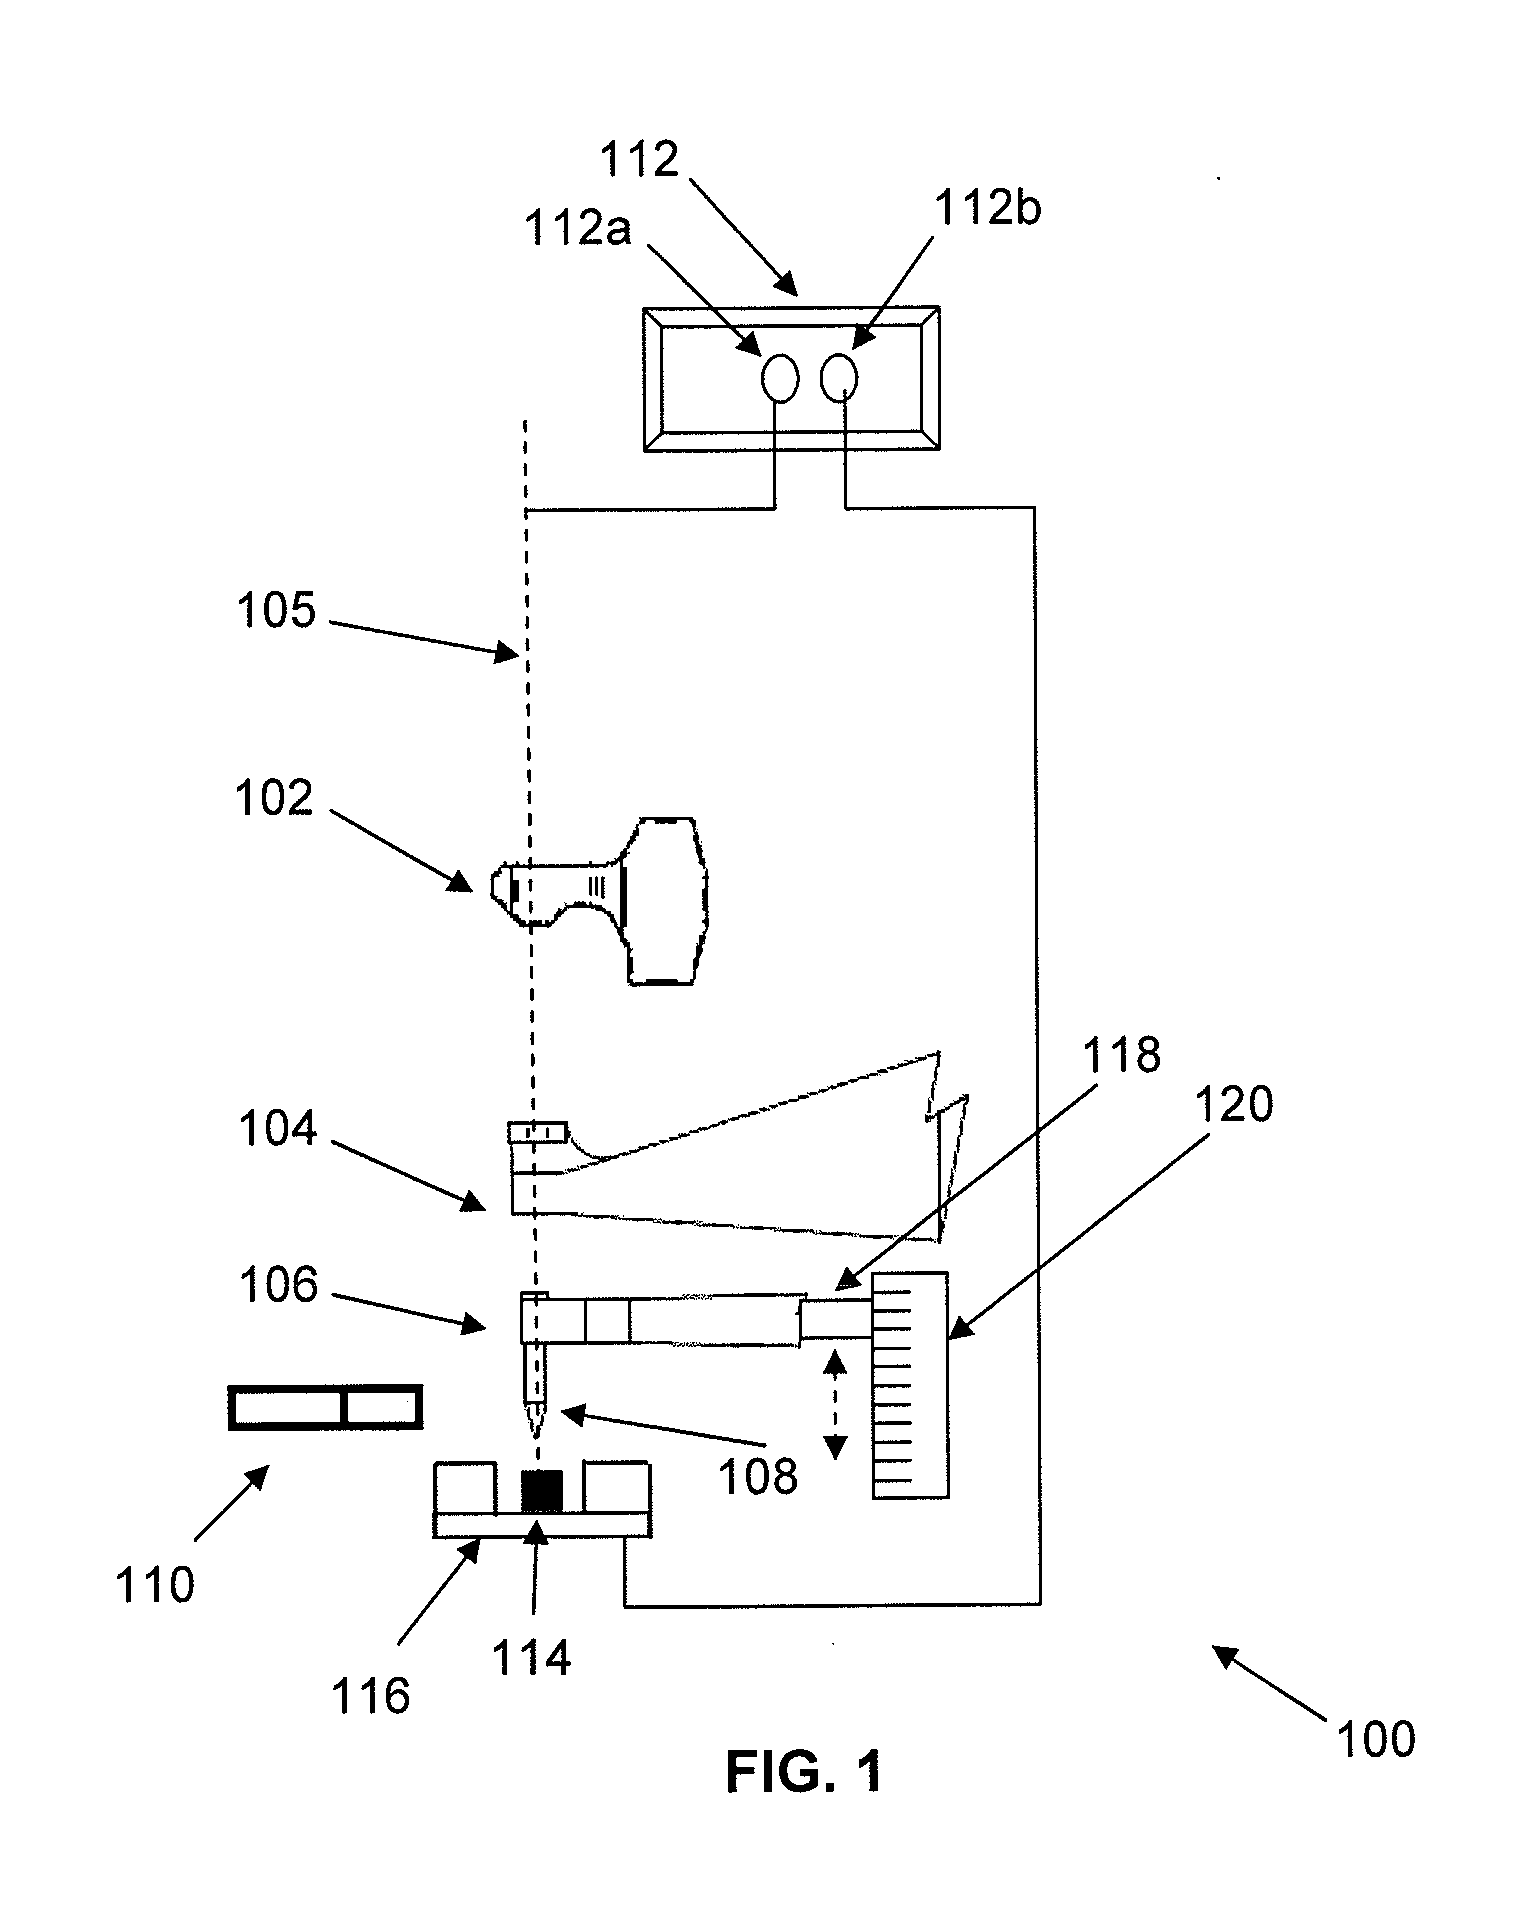 Method of recovering a bonding apparatus from a bonding failure